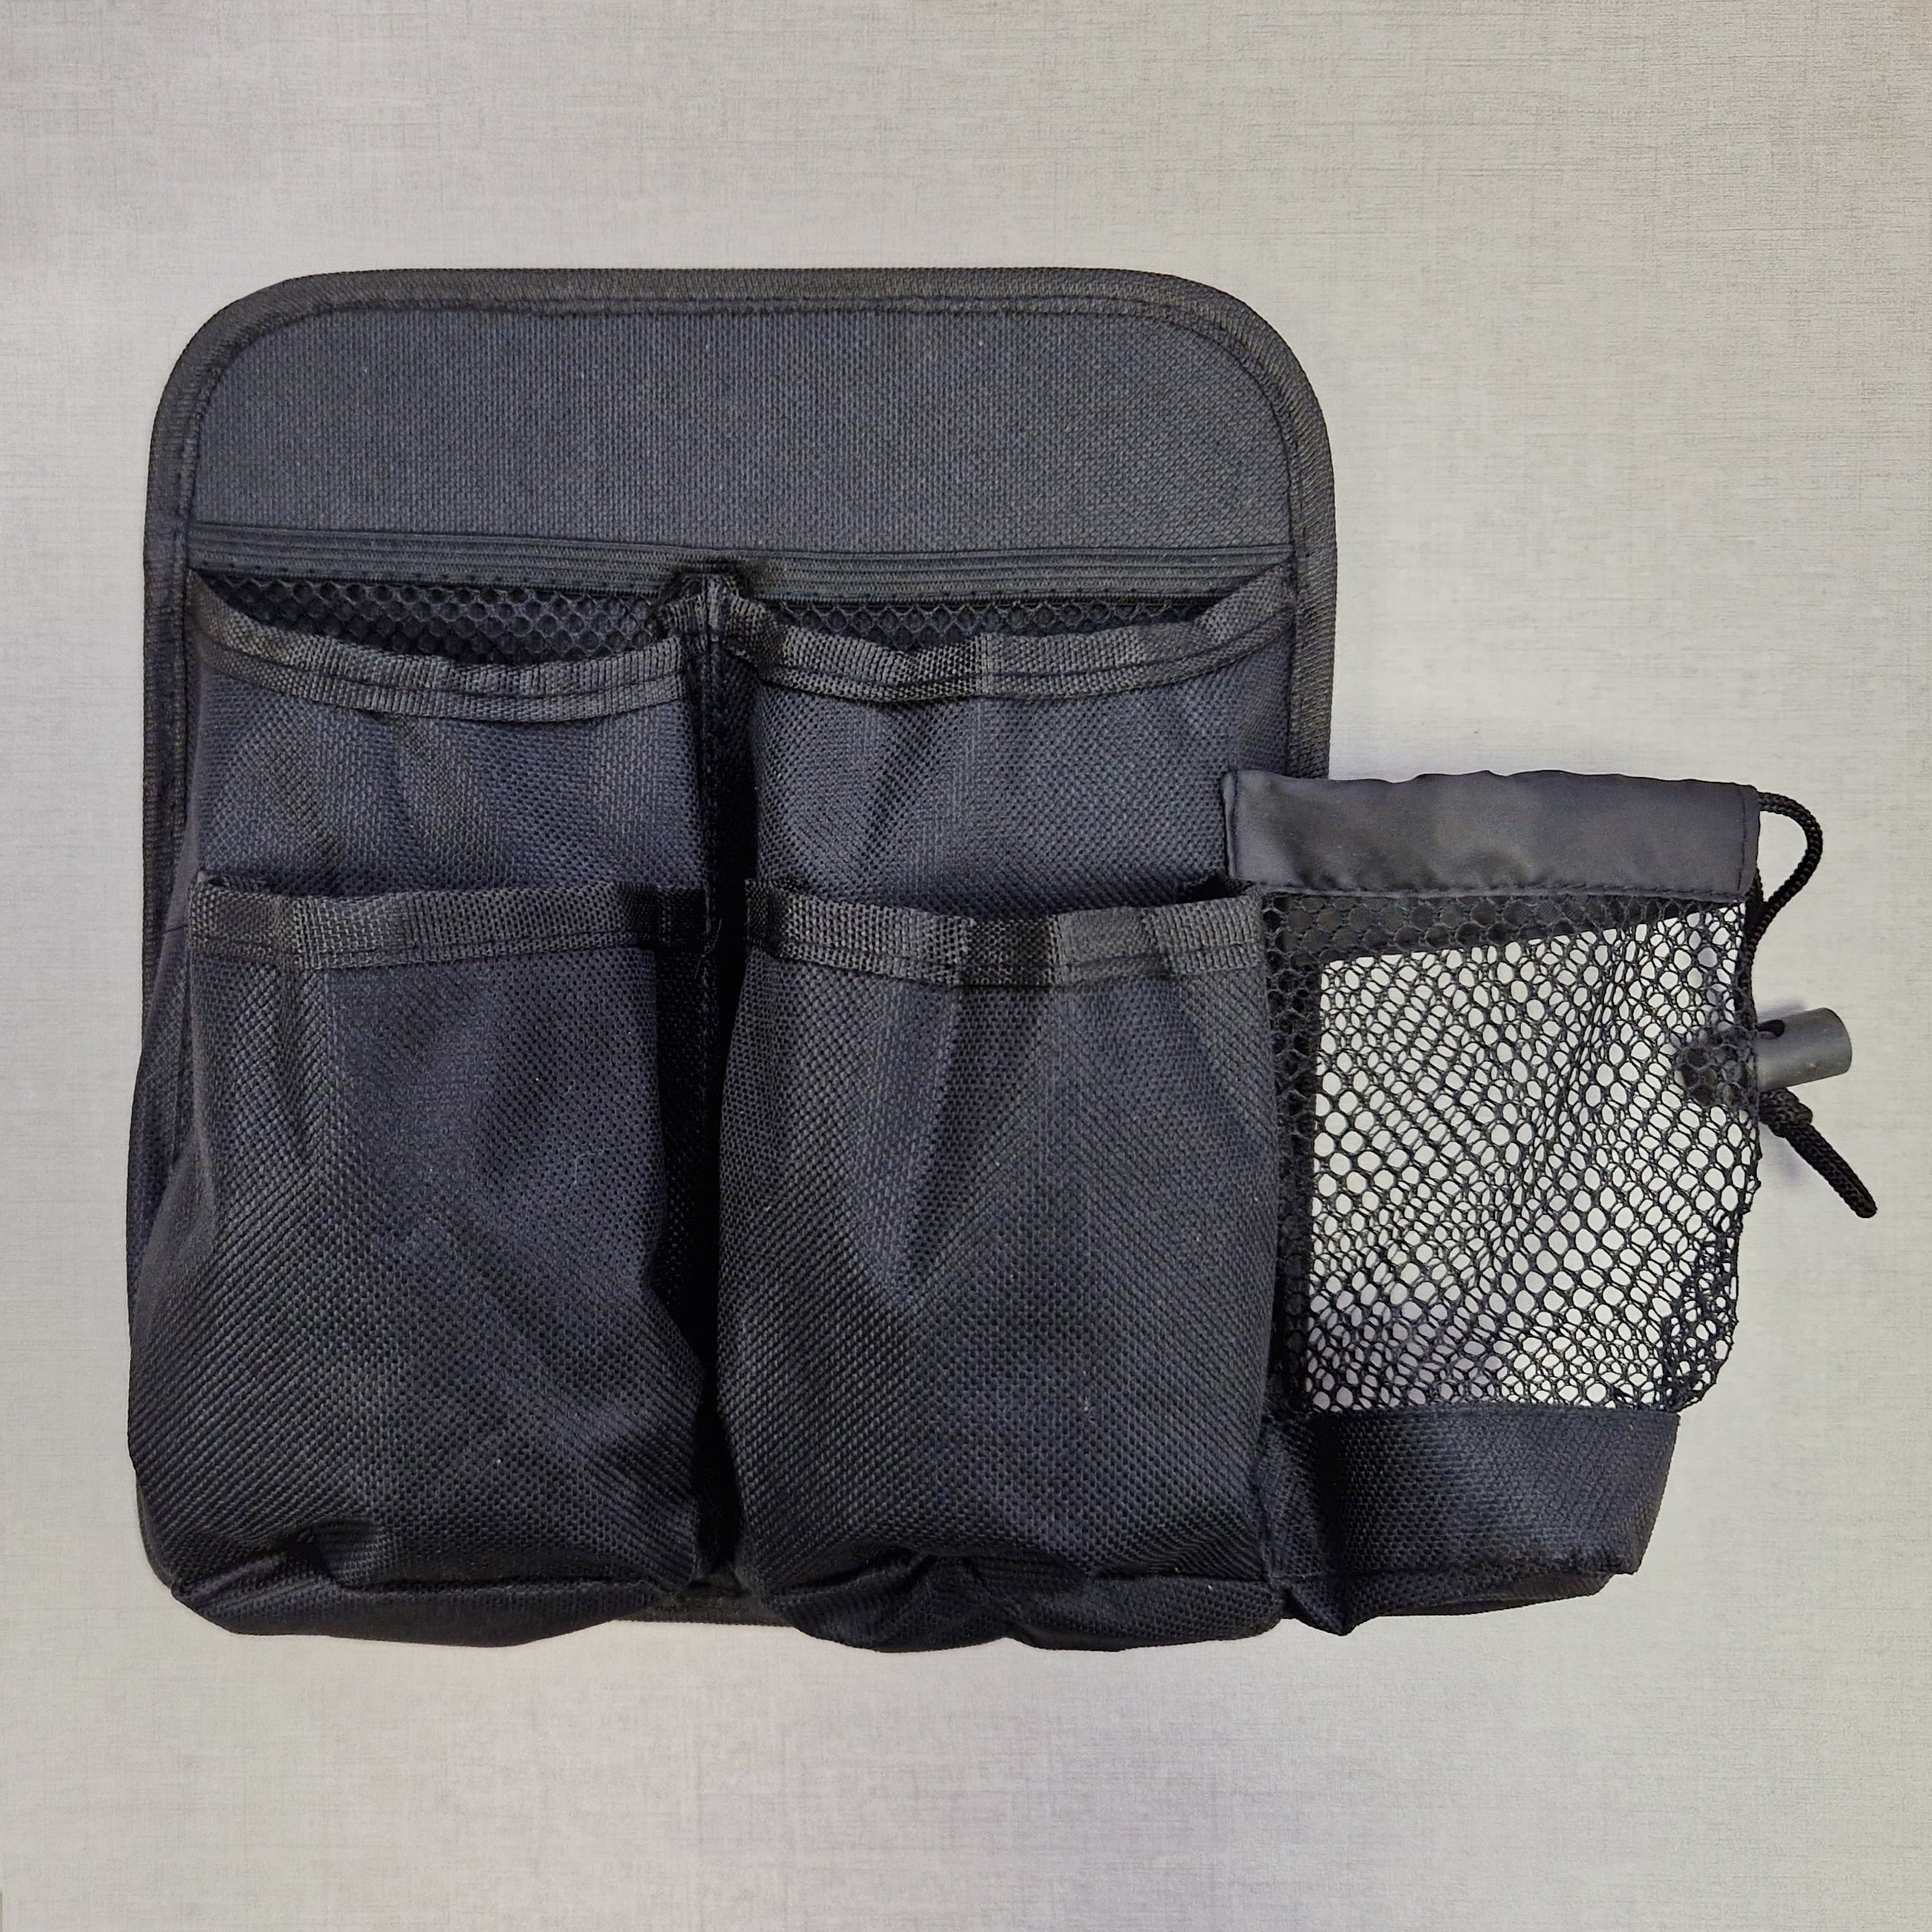 Camping Seat Multi Purpose Travel Holder Organiser 7 Pockets Including Bottle Compartment